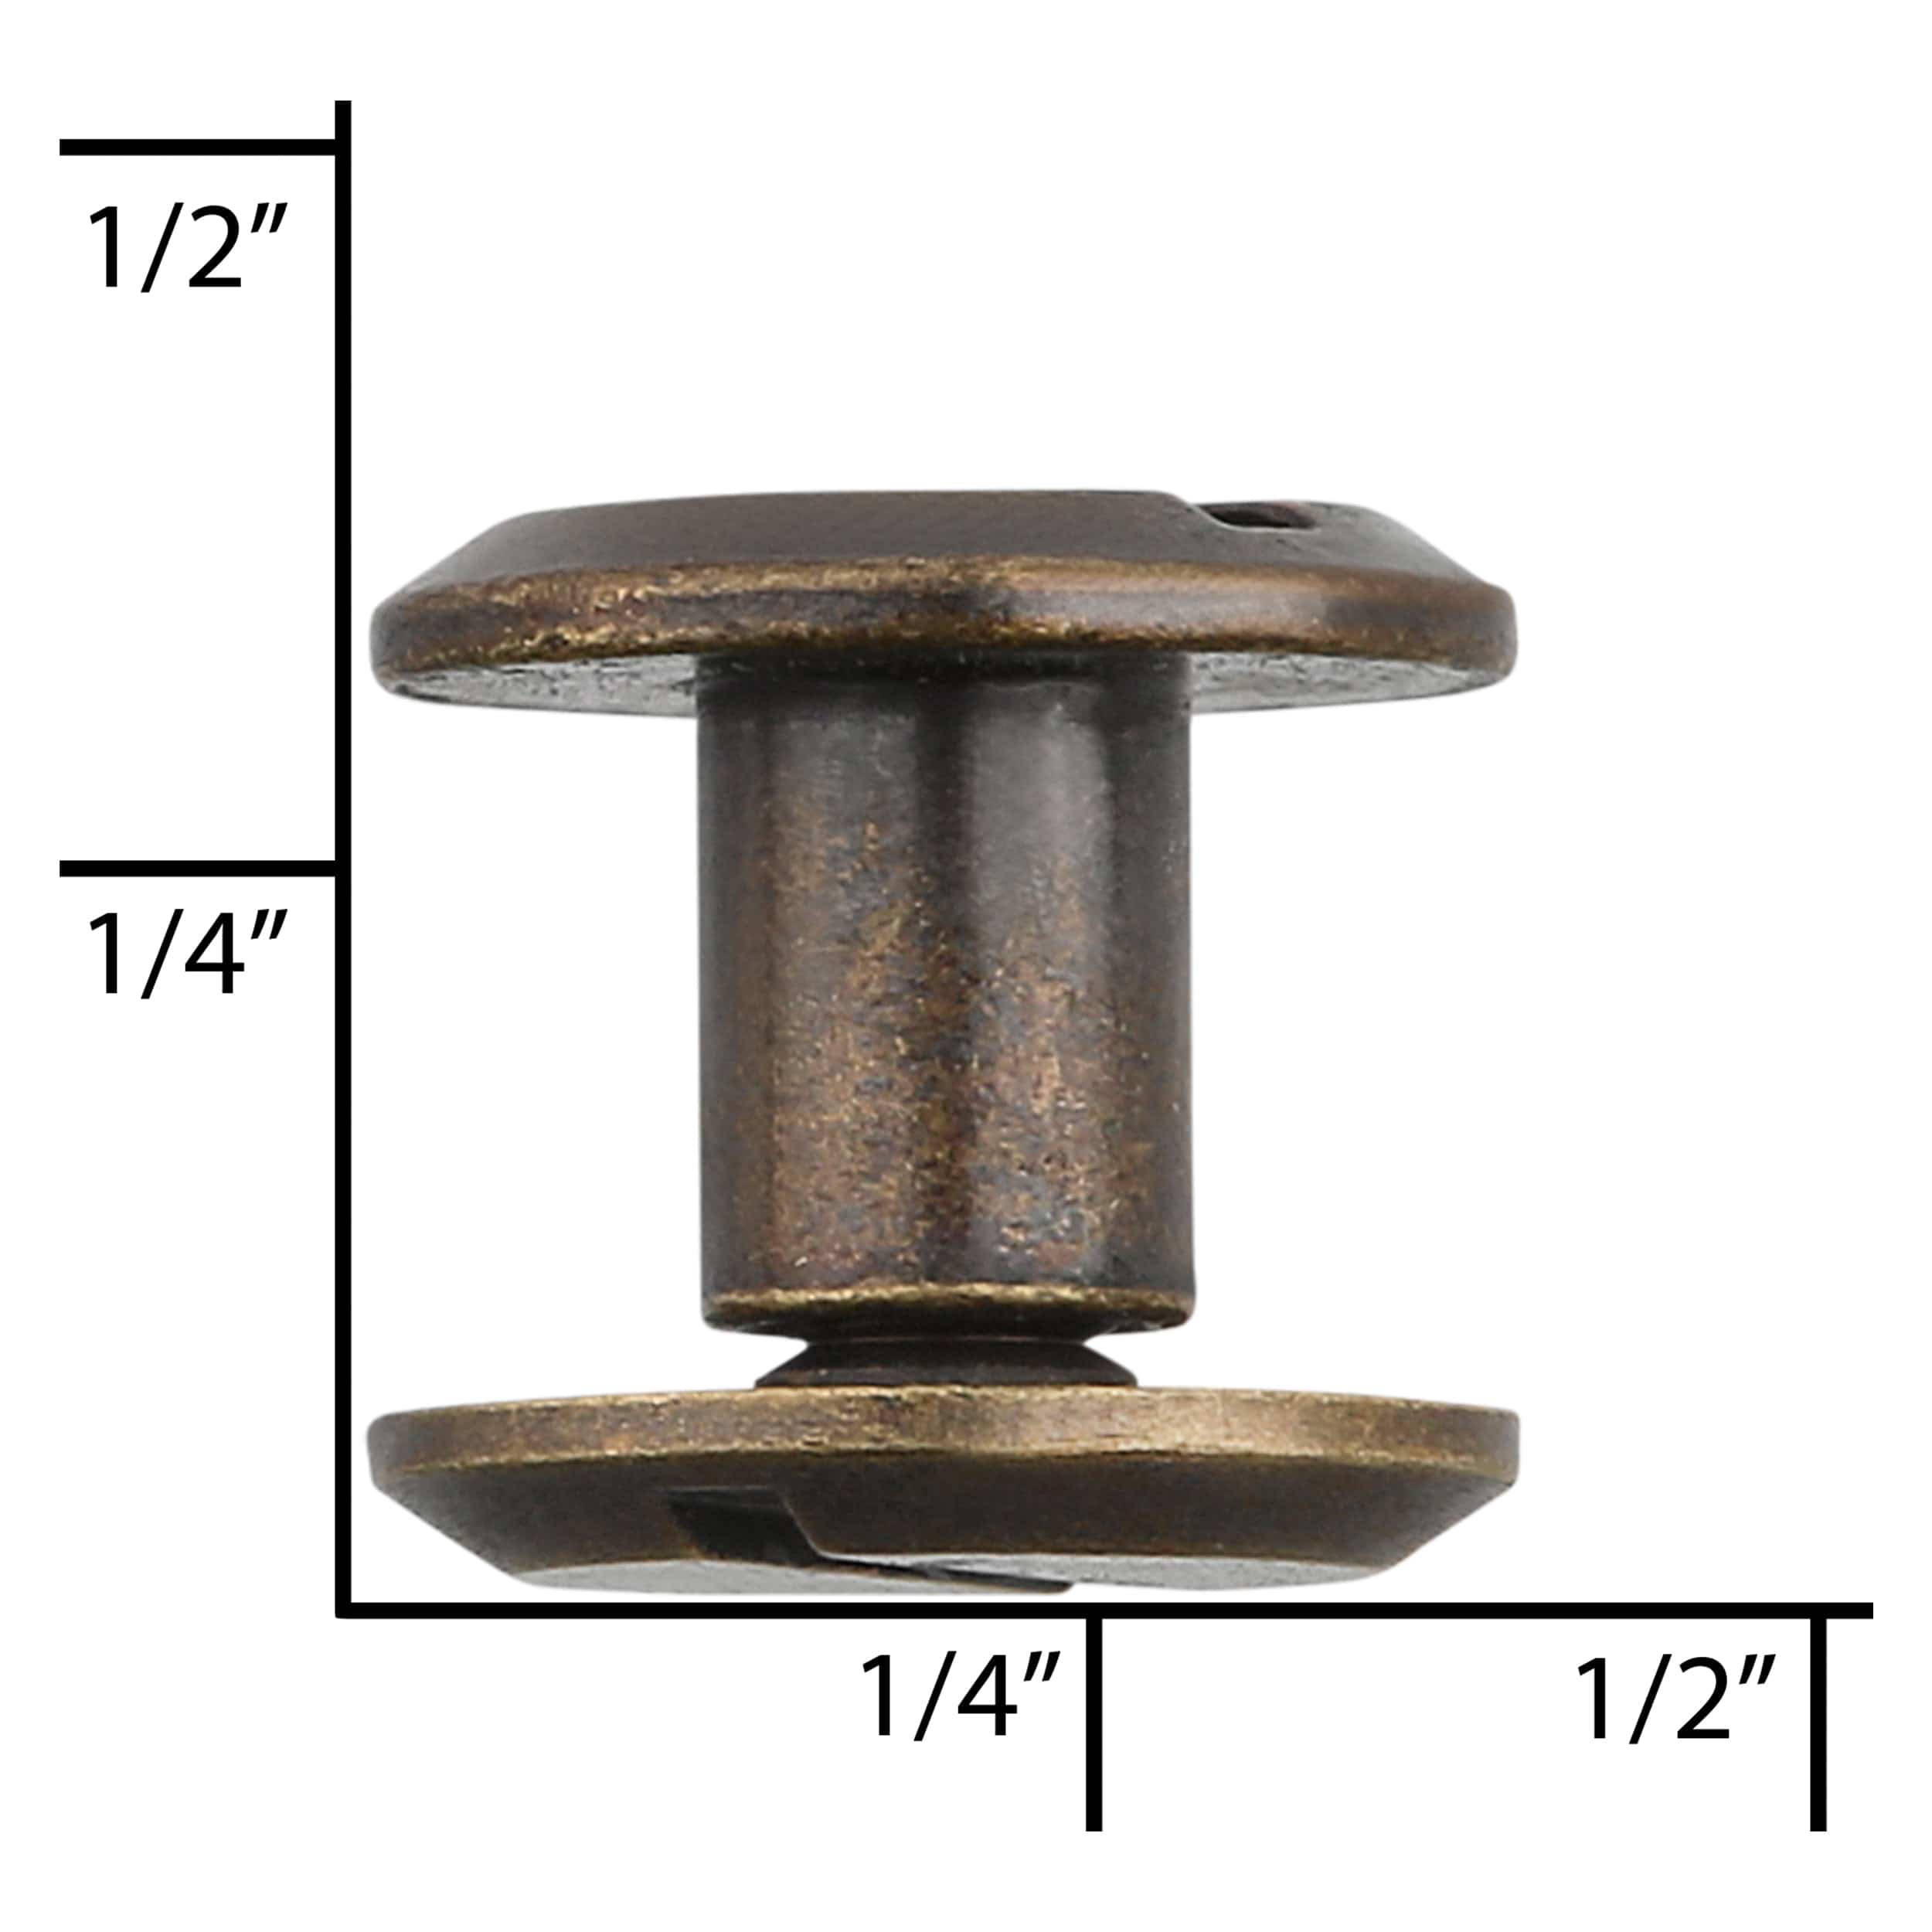 Ohio Travel Bag Fasteners 1/4" Antique Brass, Flat Top Chicago Screw, Solid Brass, #P-2334-ANTB P-2334-ANTB